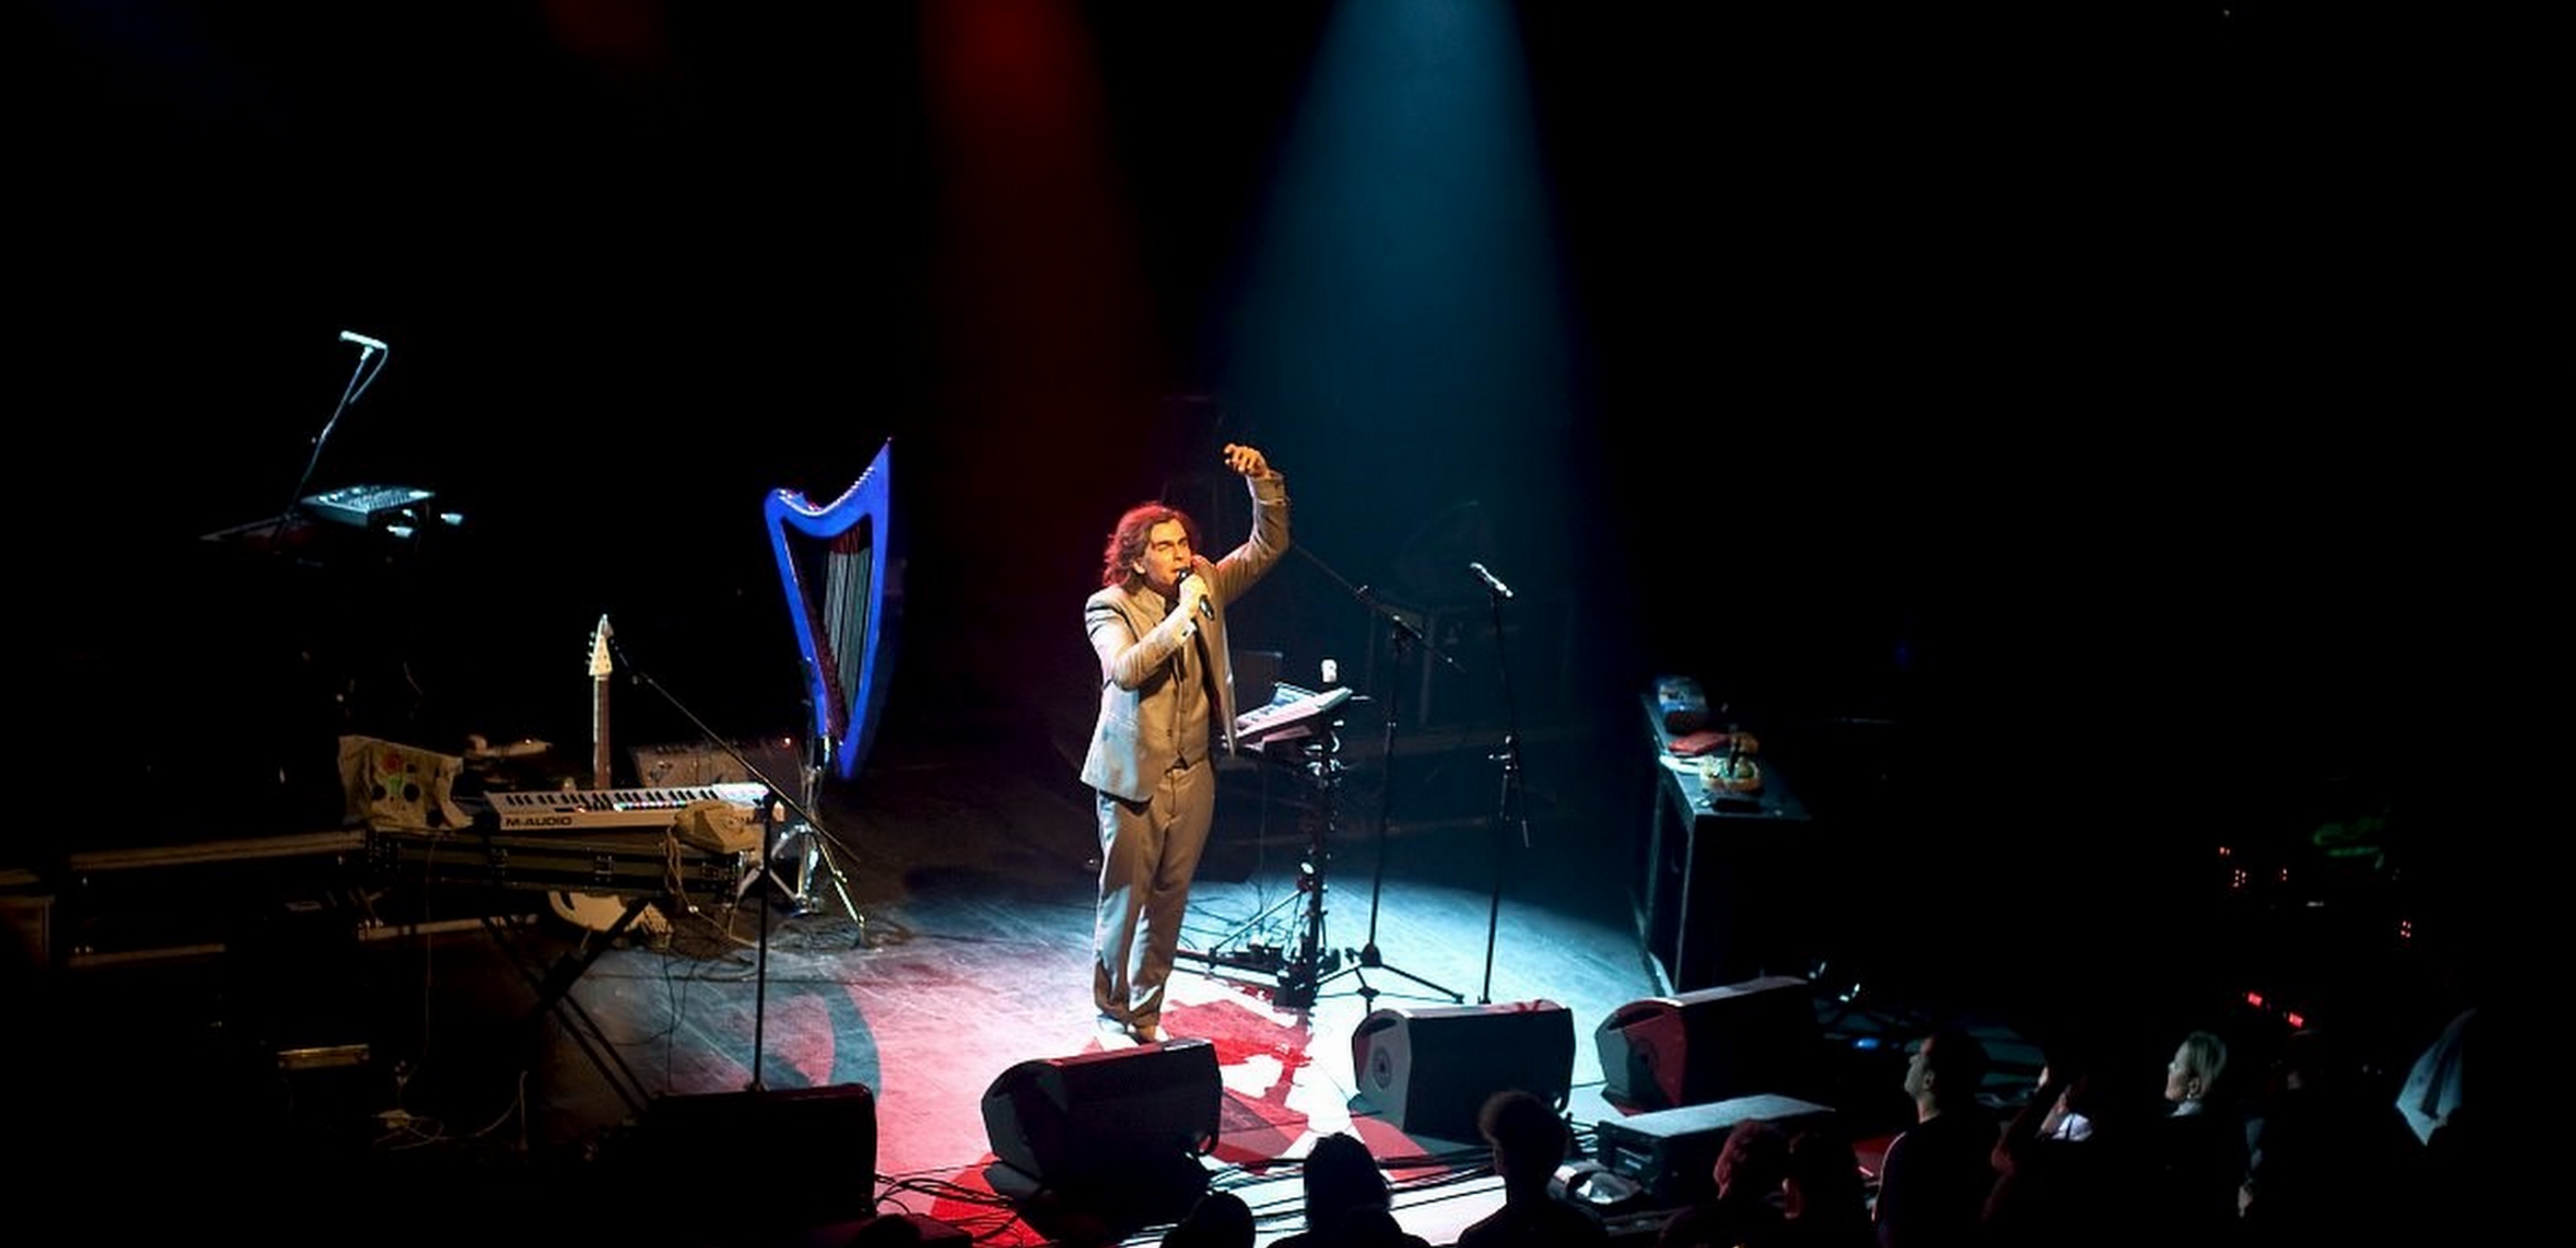 SORNE performing at The Shakespearean Theater in Gdansk, Poland on tour with CocoRosie for their Spring 2016 Heartache City Europe tour.